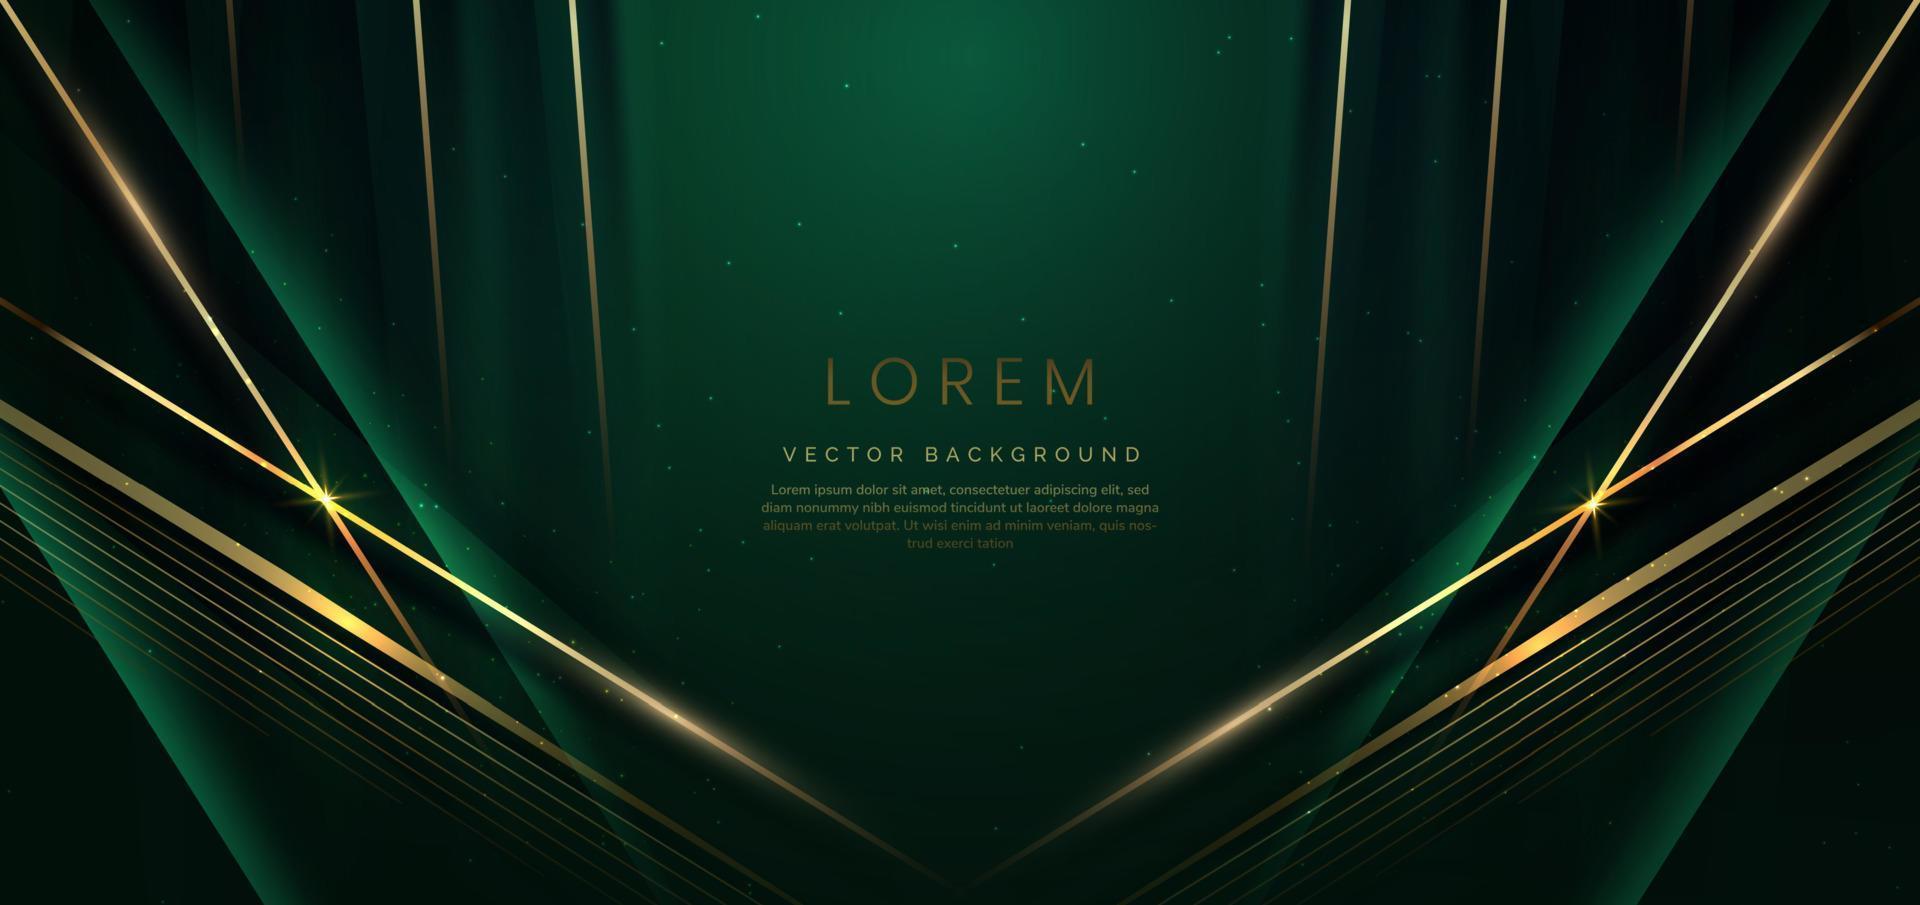 Abstract elegant dark green background with golden line and lighting effect sparkle. Luxury template design. vector